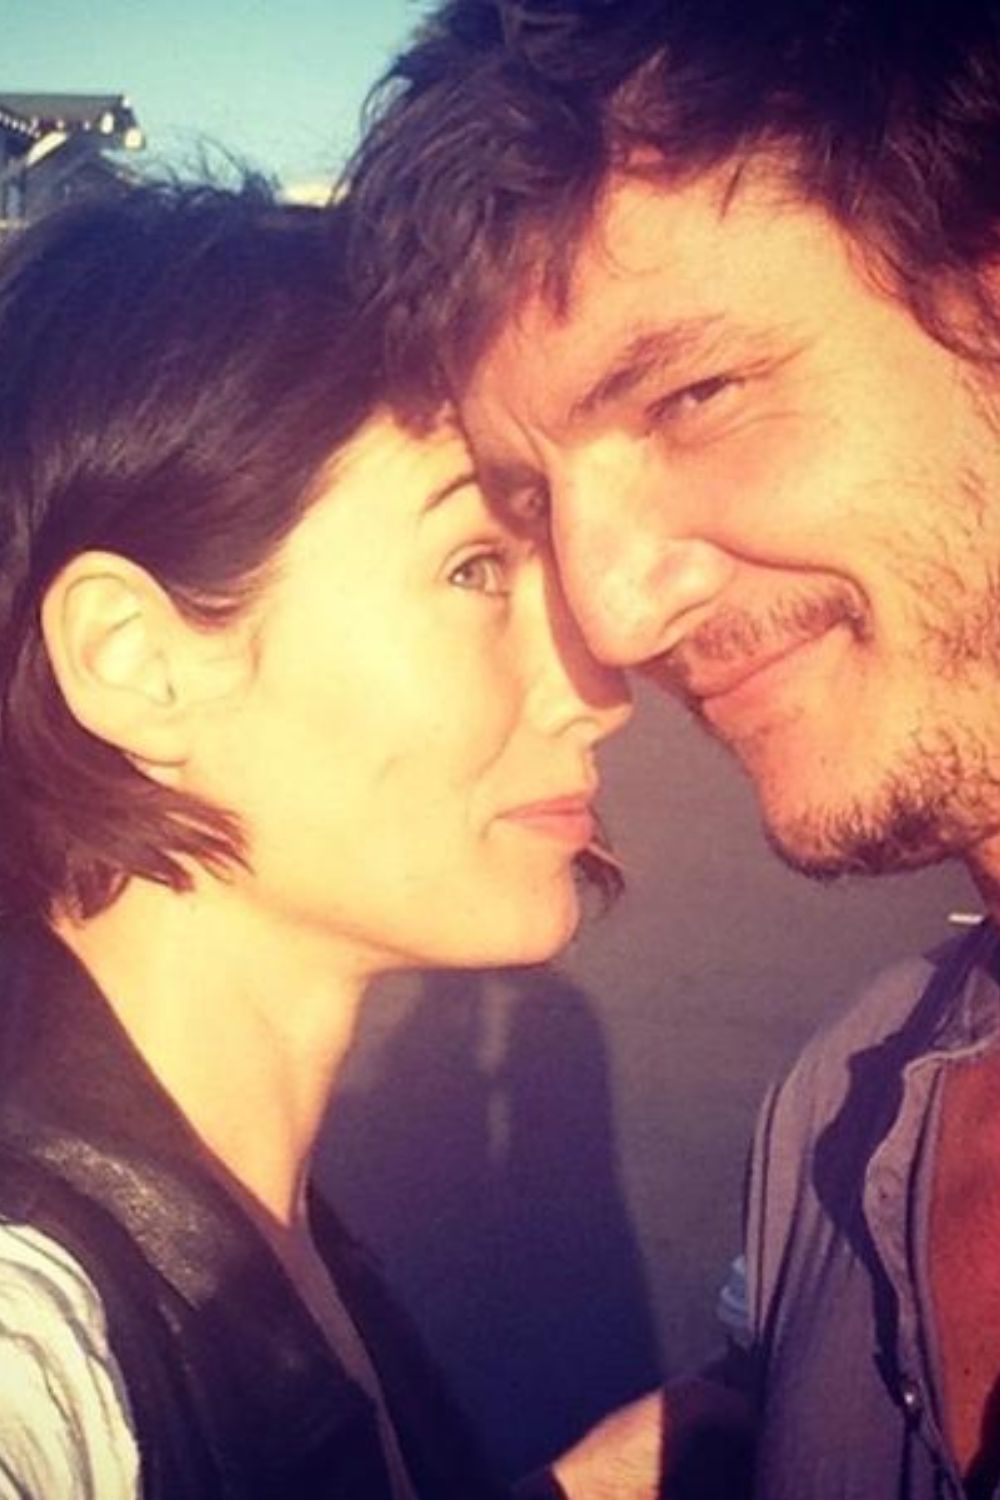 Lena Heady and Pedro Pascal from an Instagram post Heady captioned "Sunshine love"